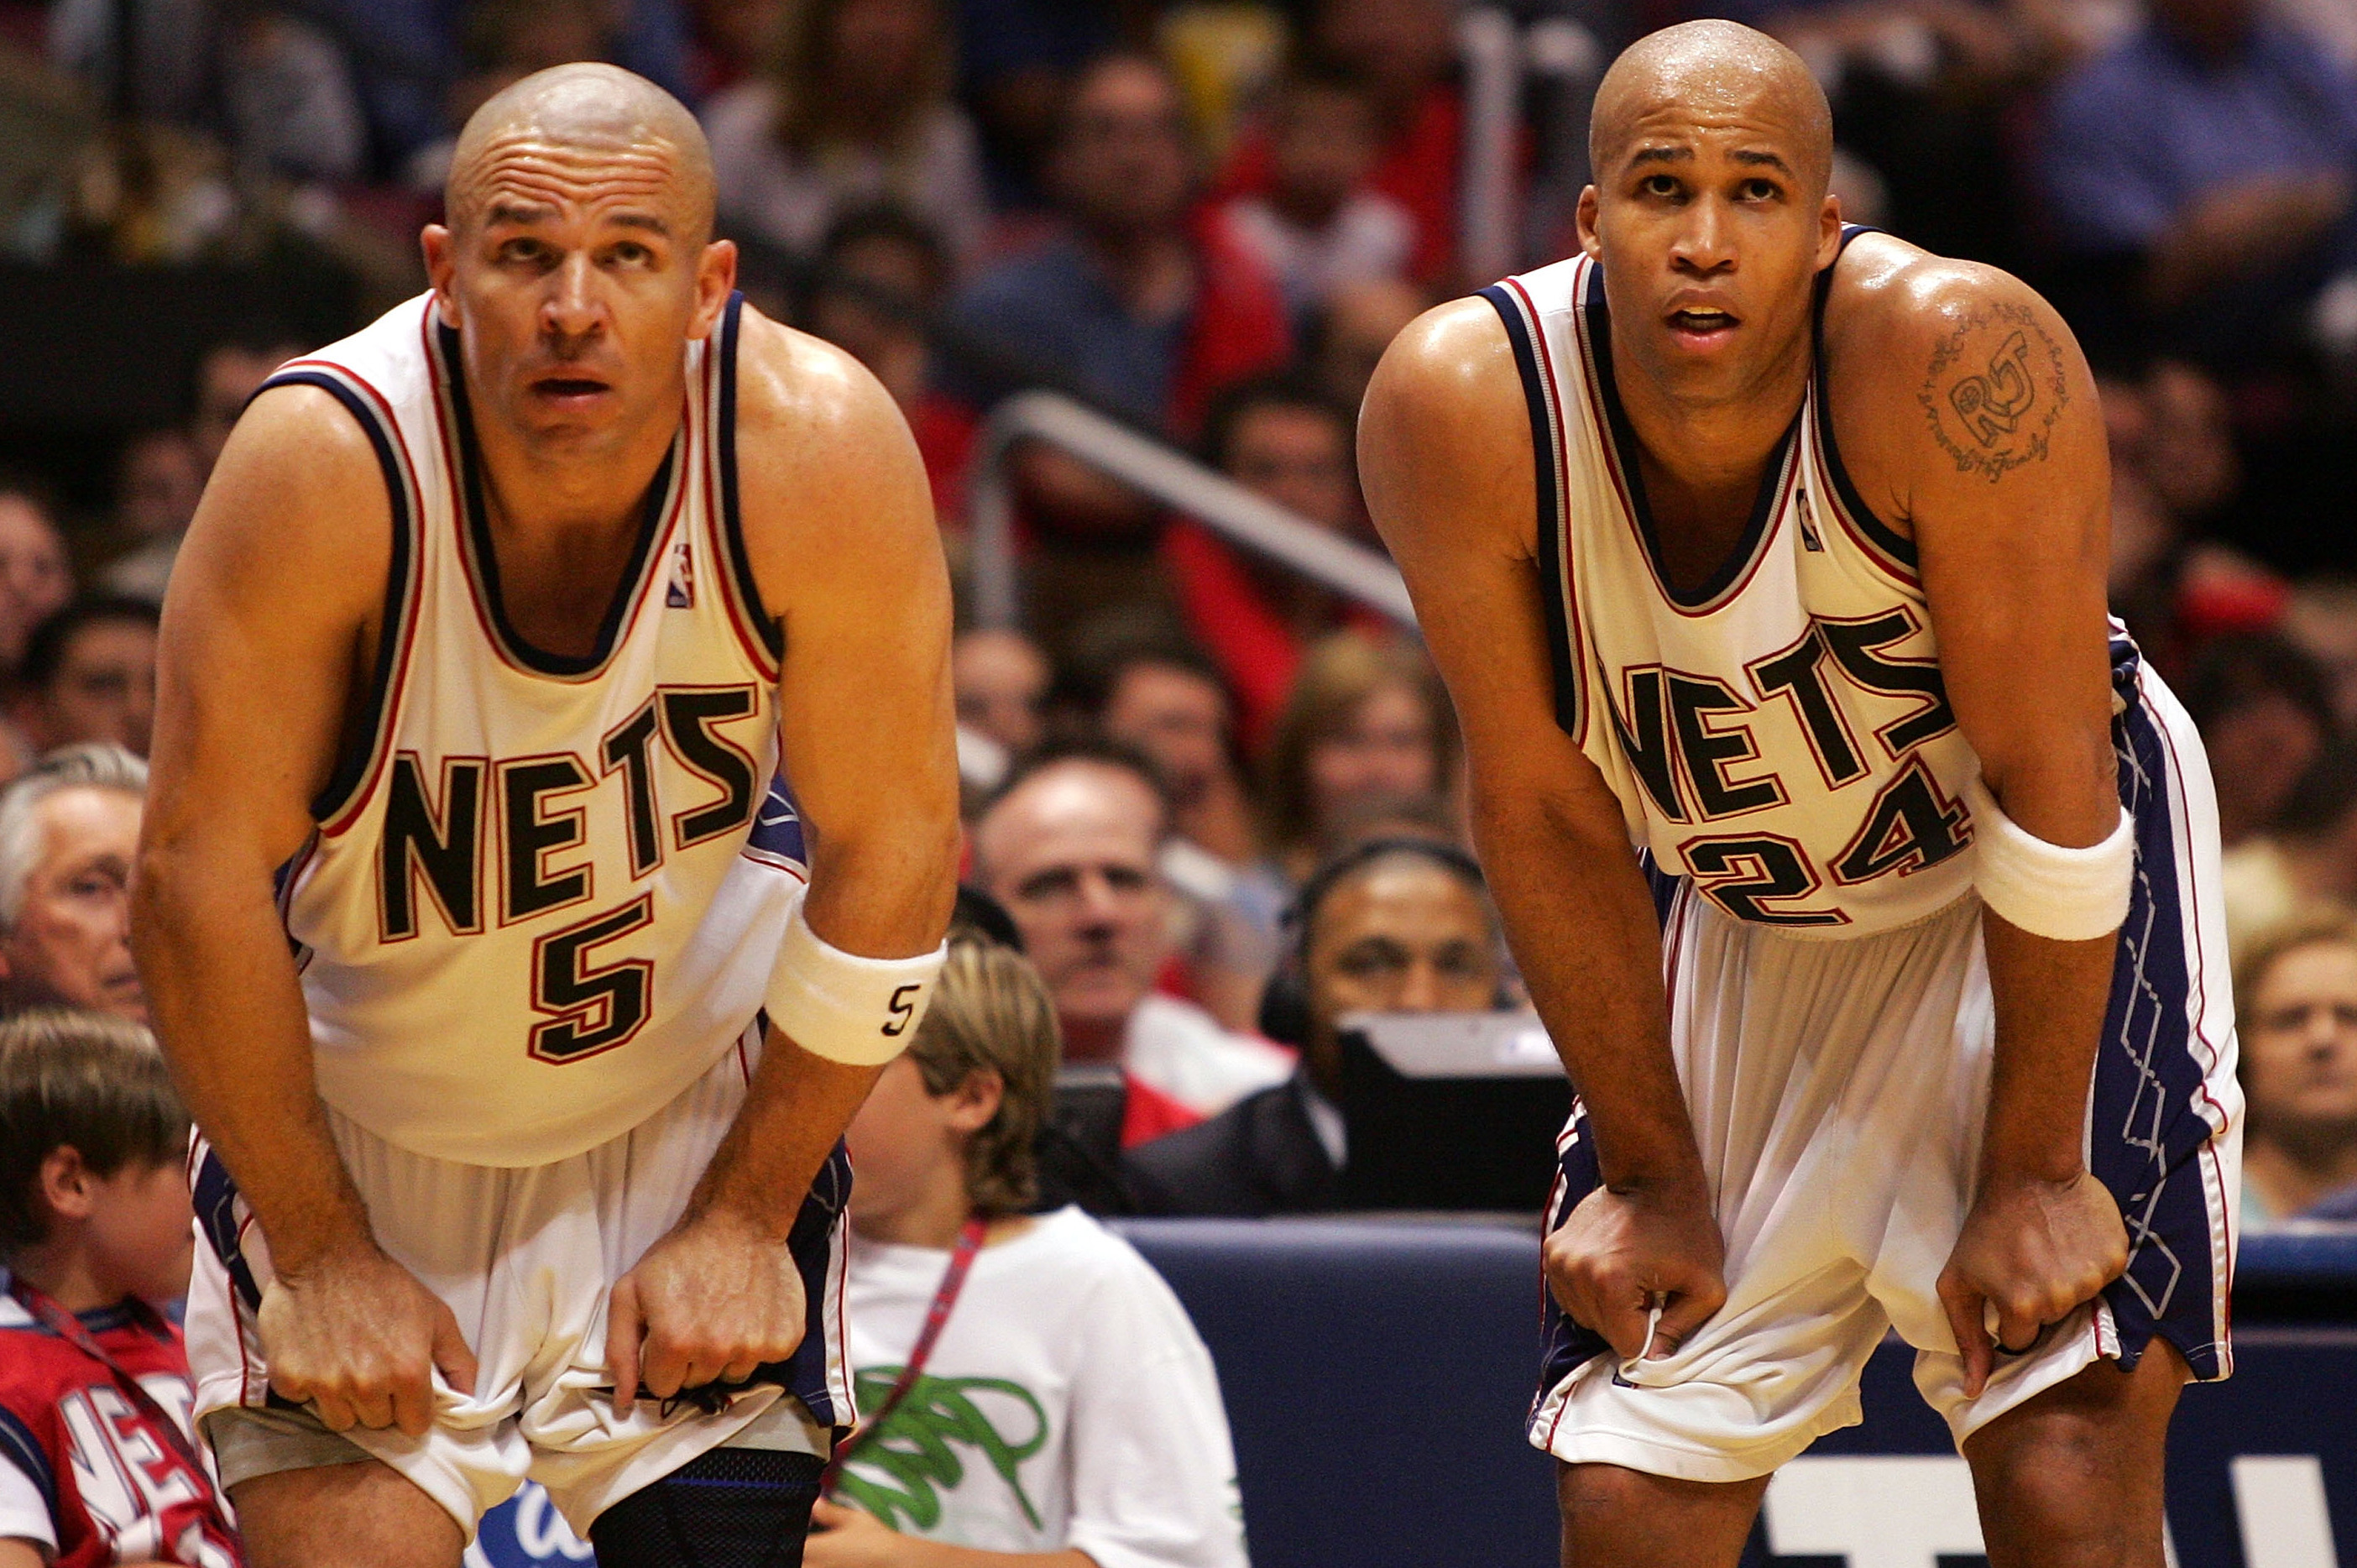 What Happened to Former Nets Star Kerry Kittles?